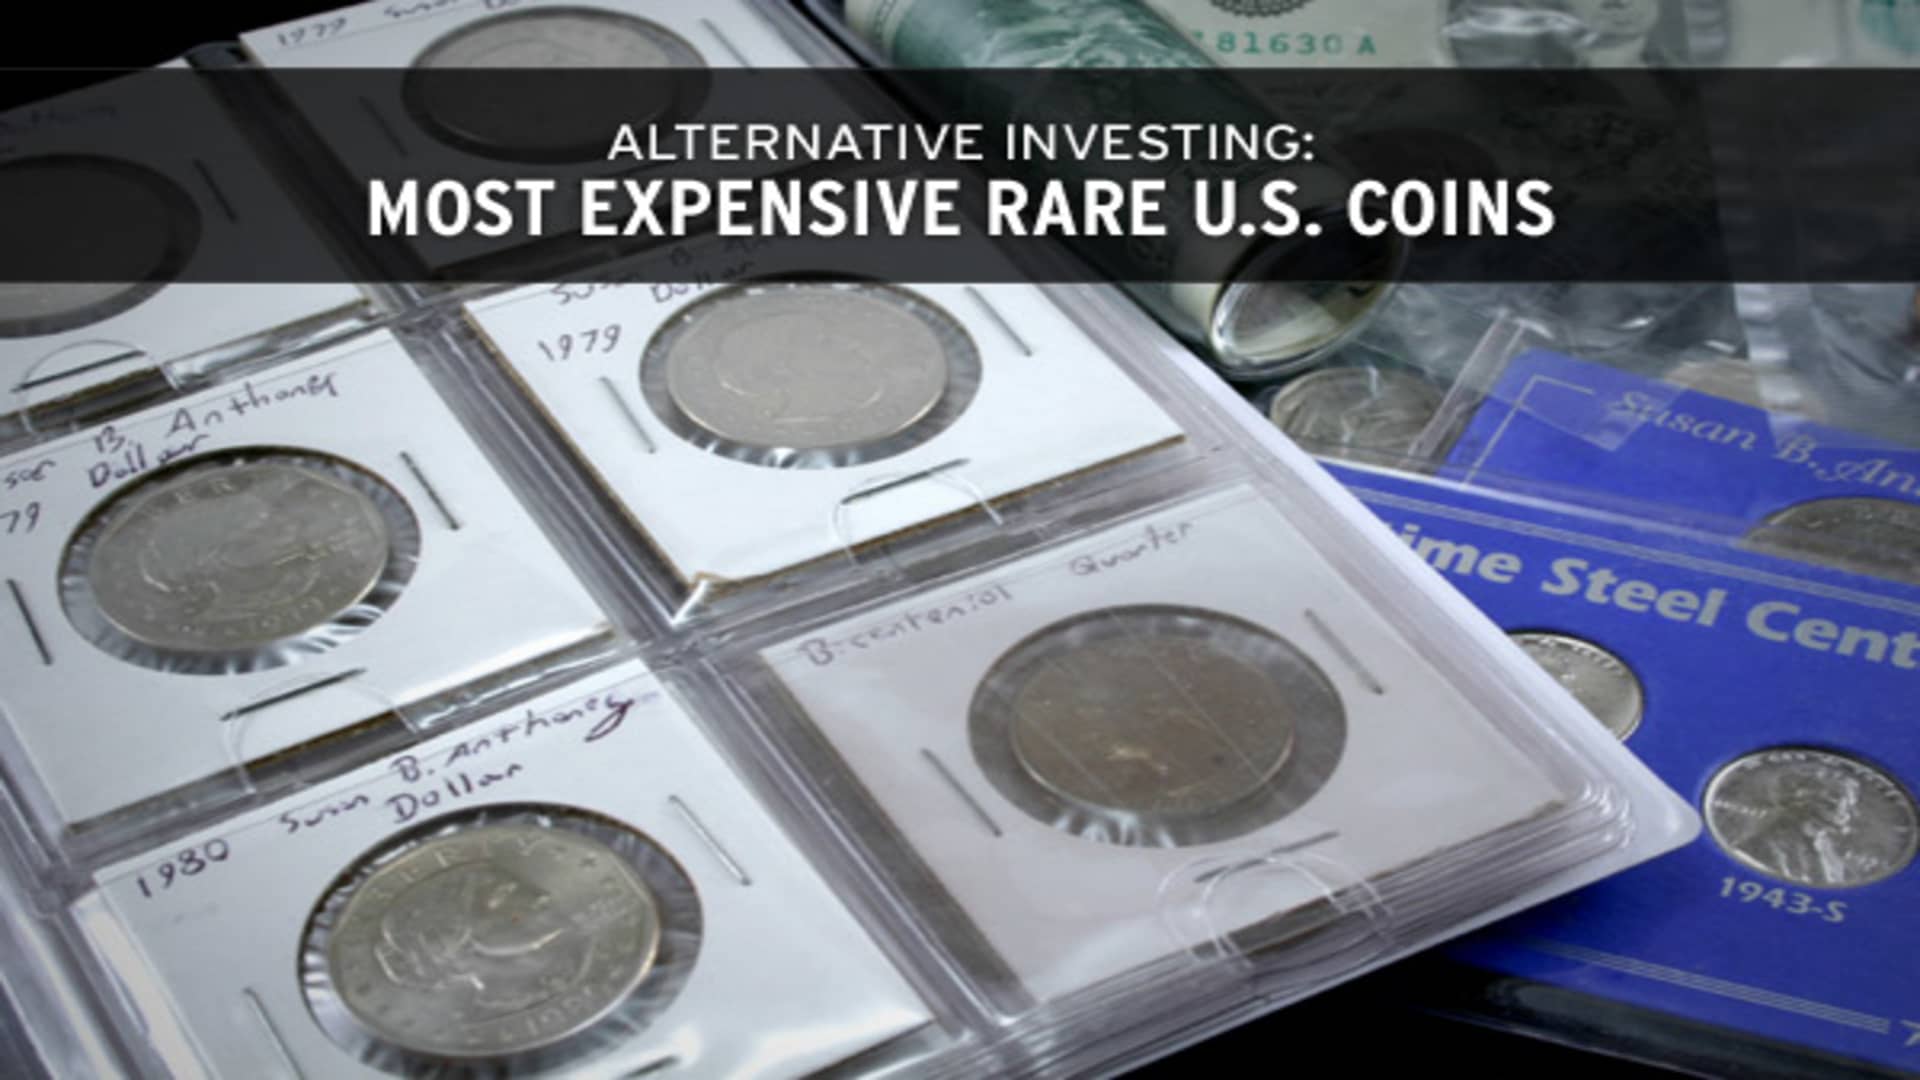 Most Expensive Rare U.S. Coins